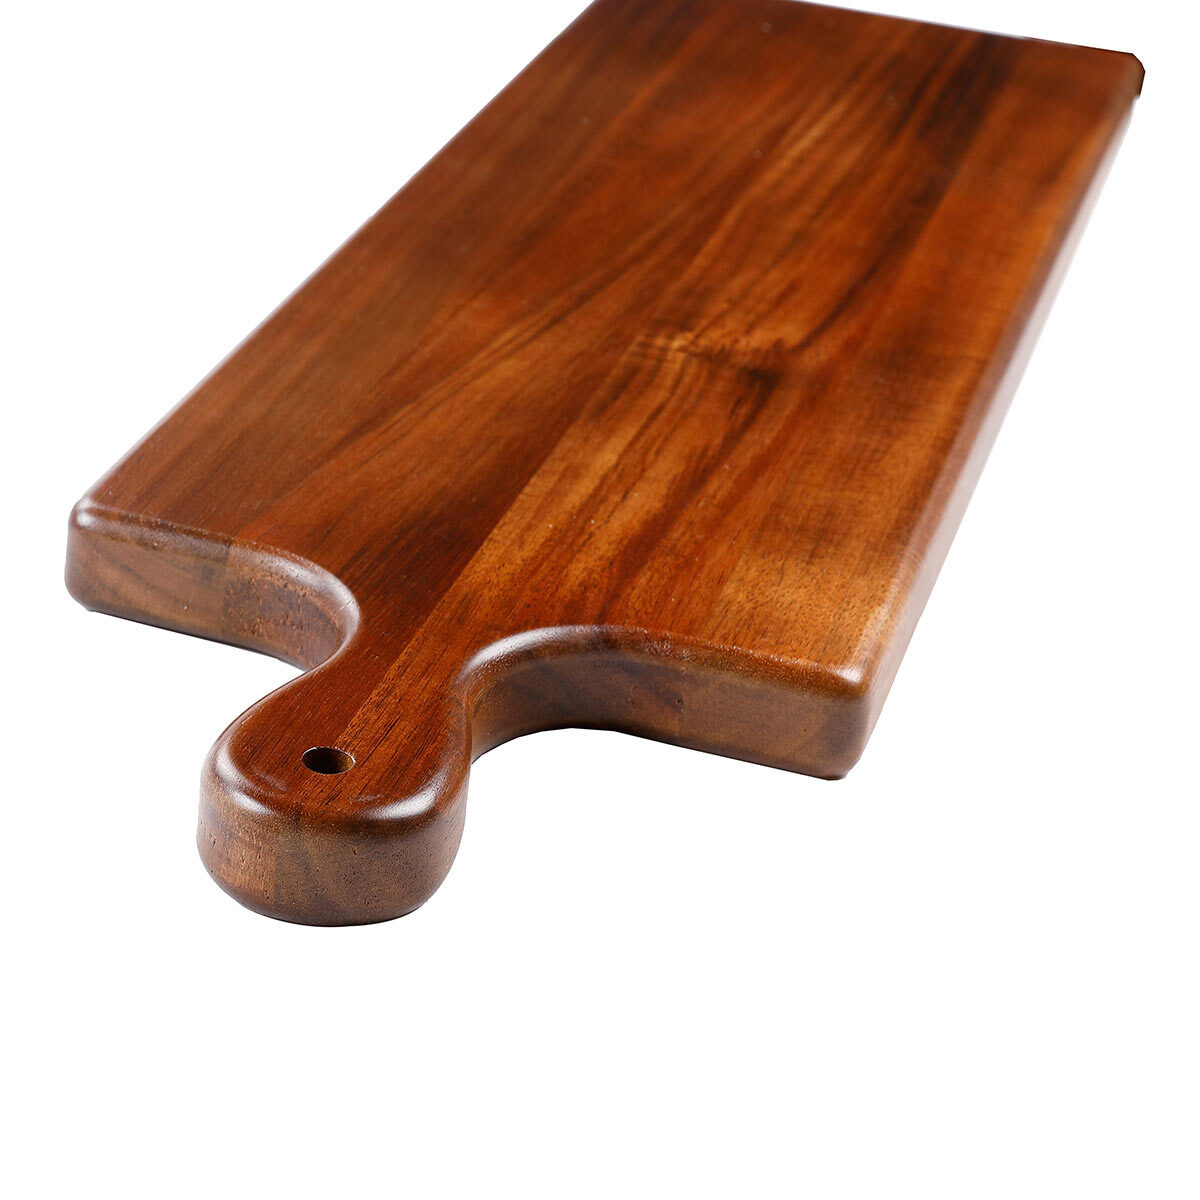 Image of a chopping board